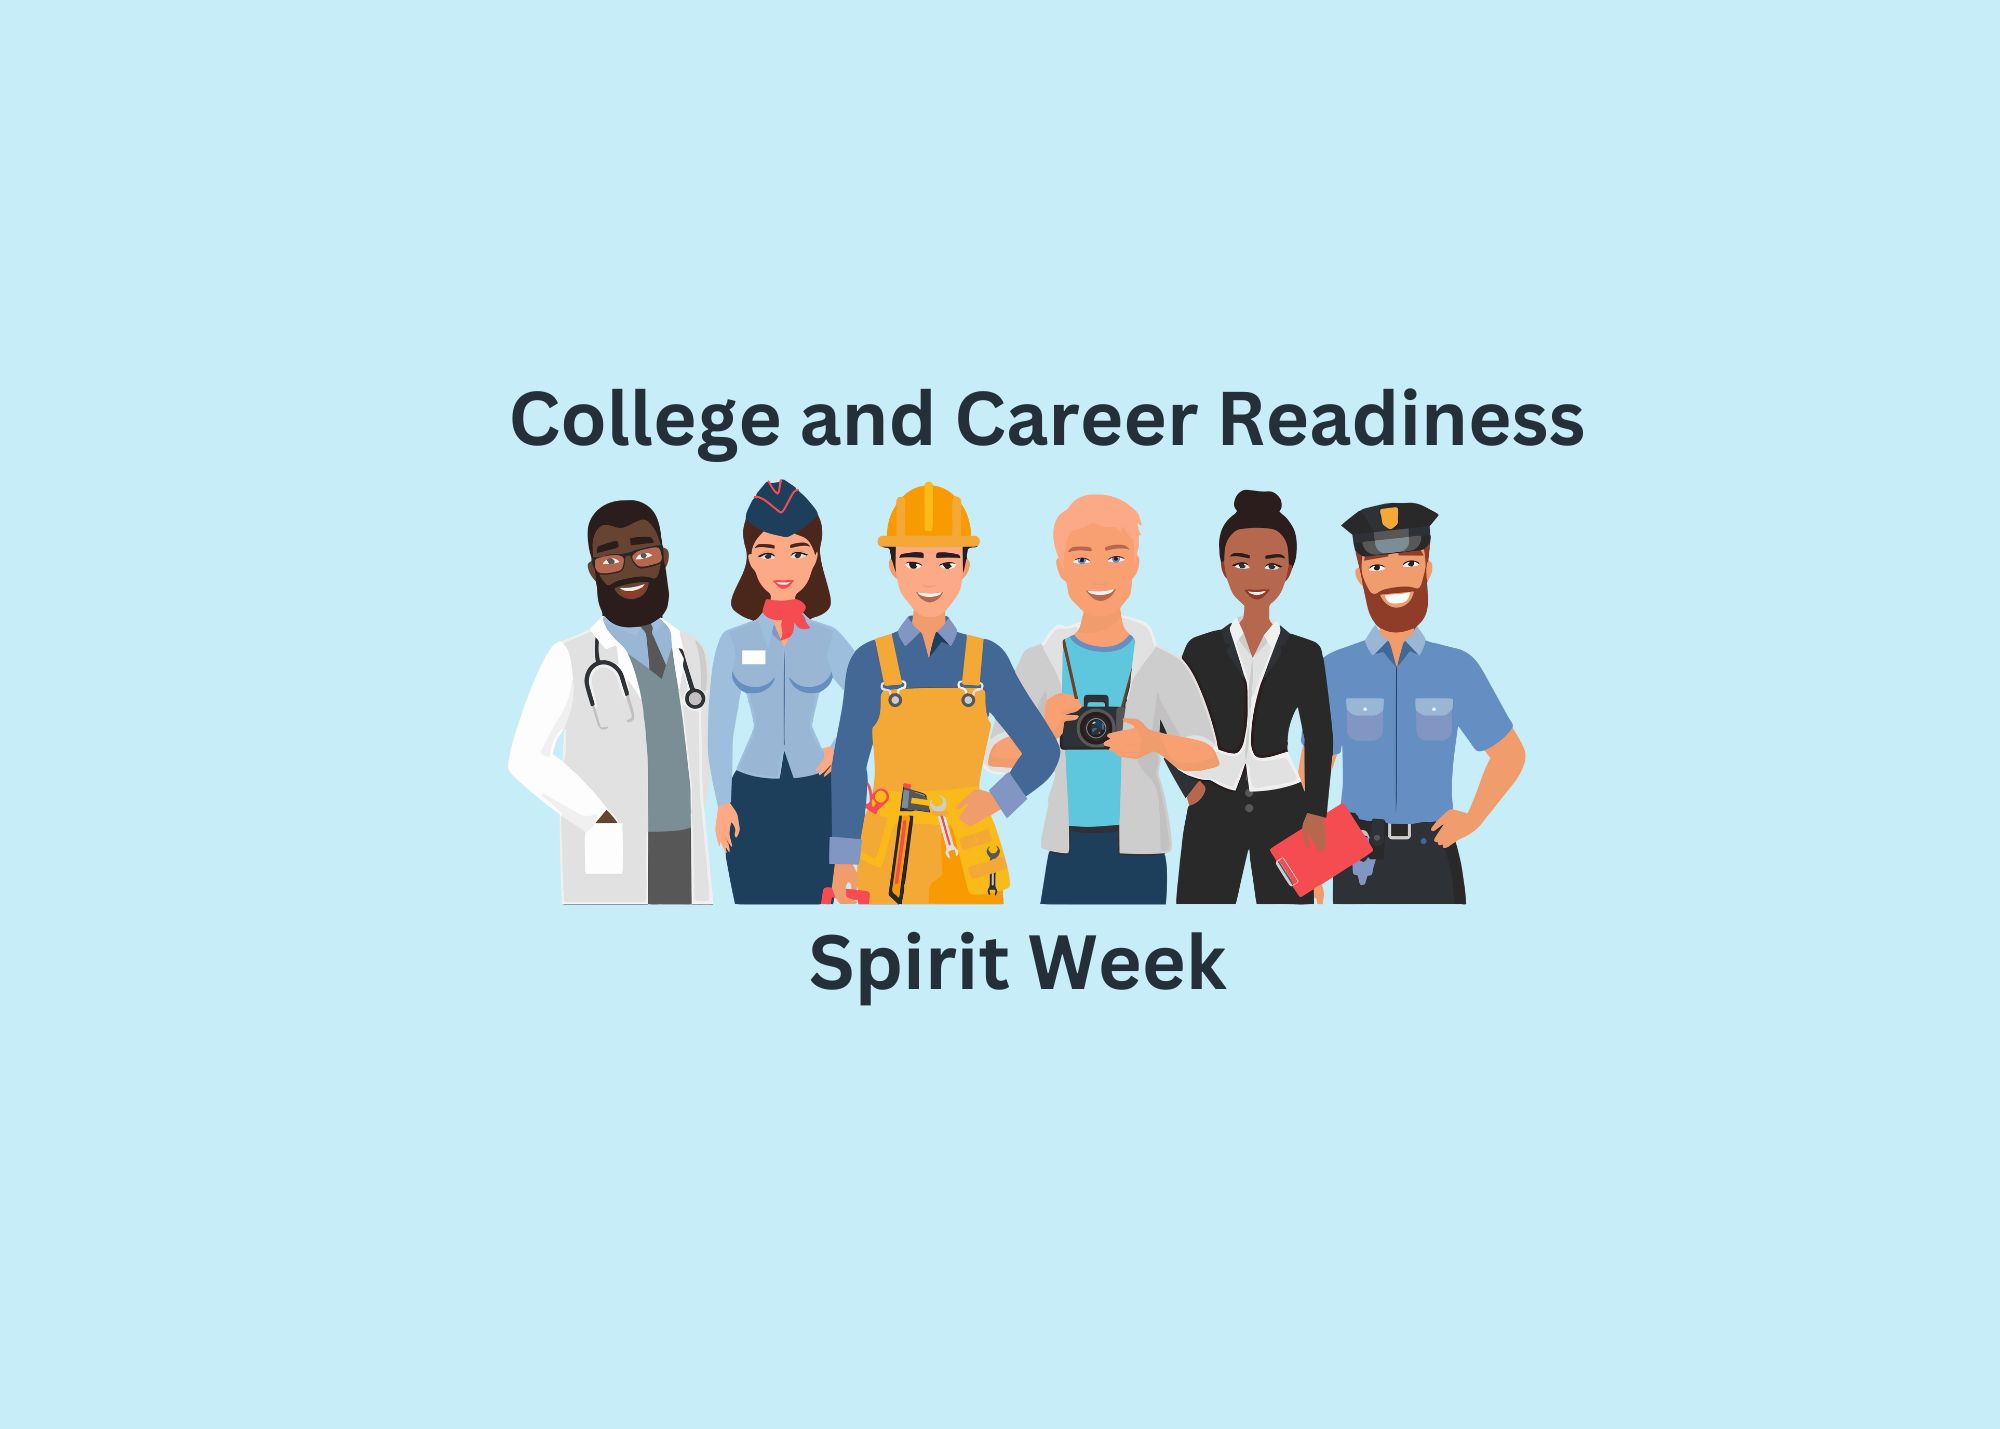 College and Career Readiness Spirit week with five people in careers.